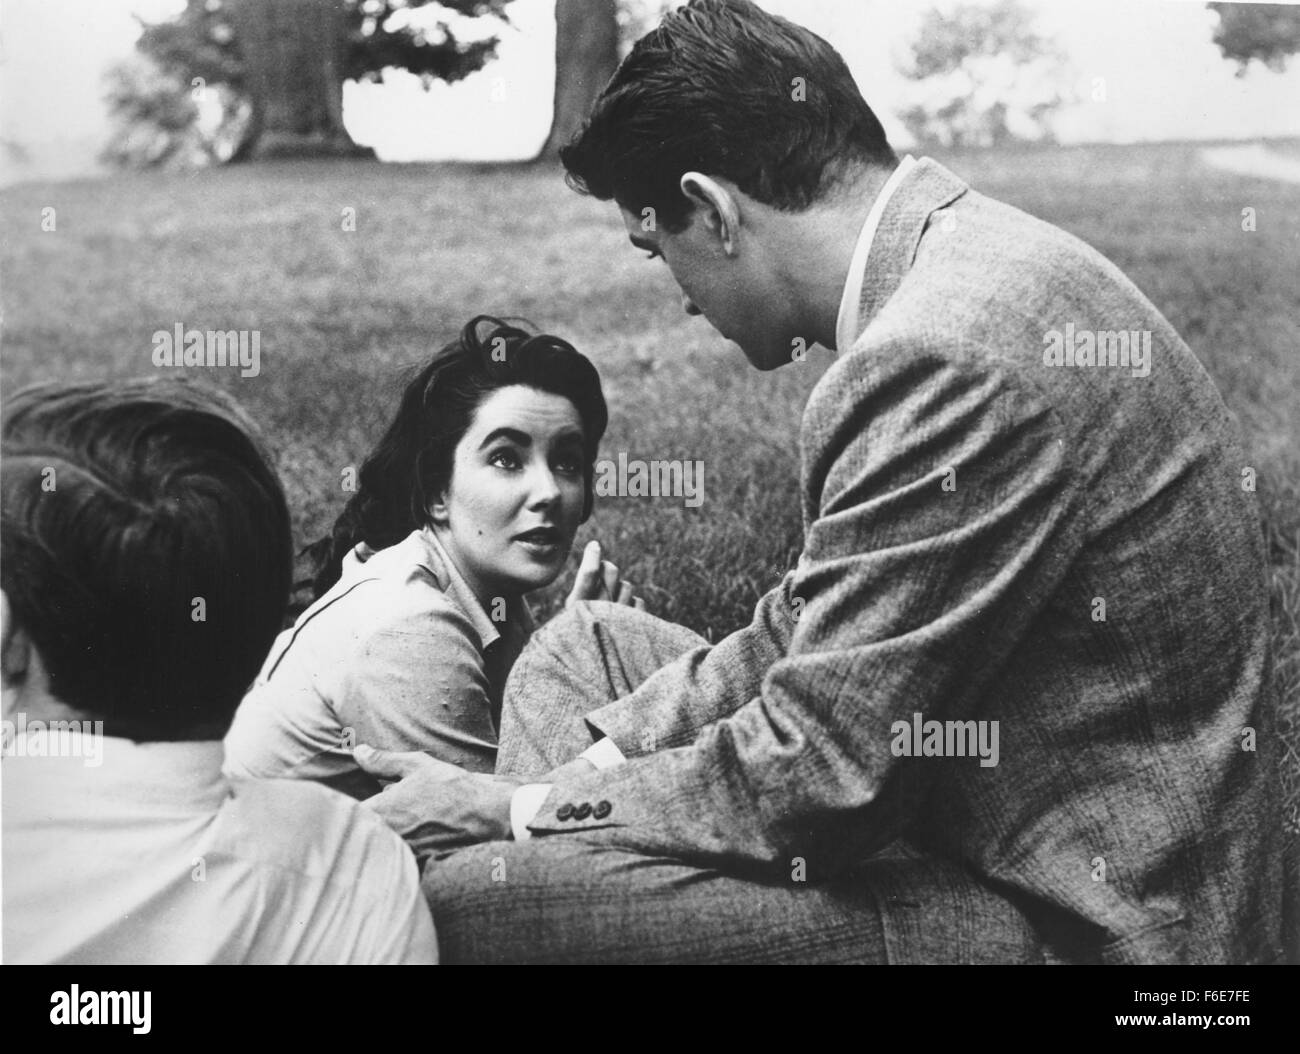 RELEASE DATE: November 24, 1956. MOVIE TITLE: Giant. STUDIO: Giant Productions. PLOT: Texan rancher Bick Benedict visits a Maryland farm to buy a prize horse. Whilst there he meets and falls in love with the owner's daughter Leslie, they are married immediately and return to his ranch. The story of their family and its rivalry with cowboy and (later oil tycoon) Jett Rink unfolds across two generations. PICTURED: ELIZABETH TAYLOR as Leslie Benedict. and ROCK HUDSON as Jordan 'Bick' Benedict Jr. Stock Photo